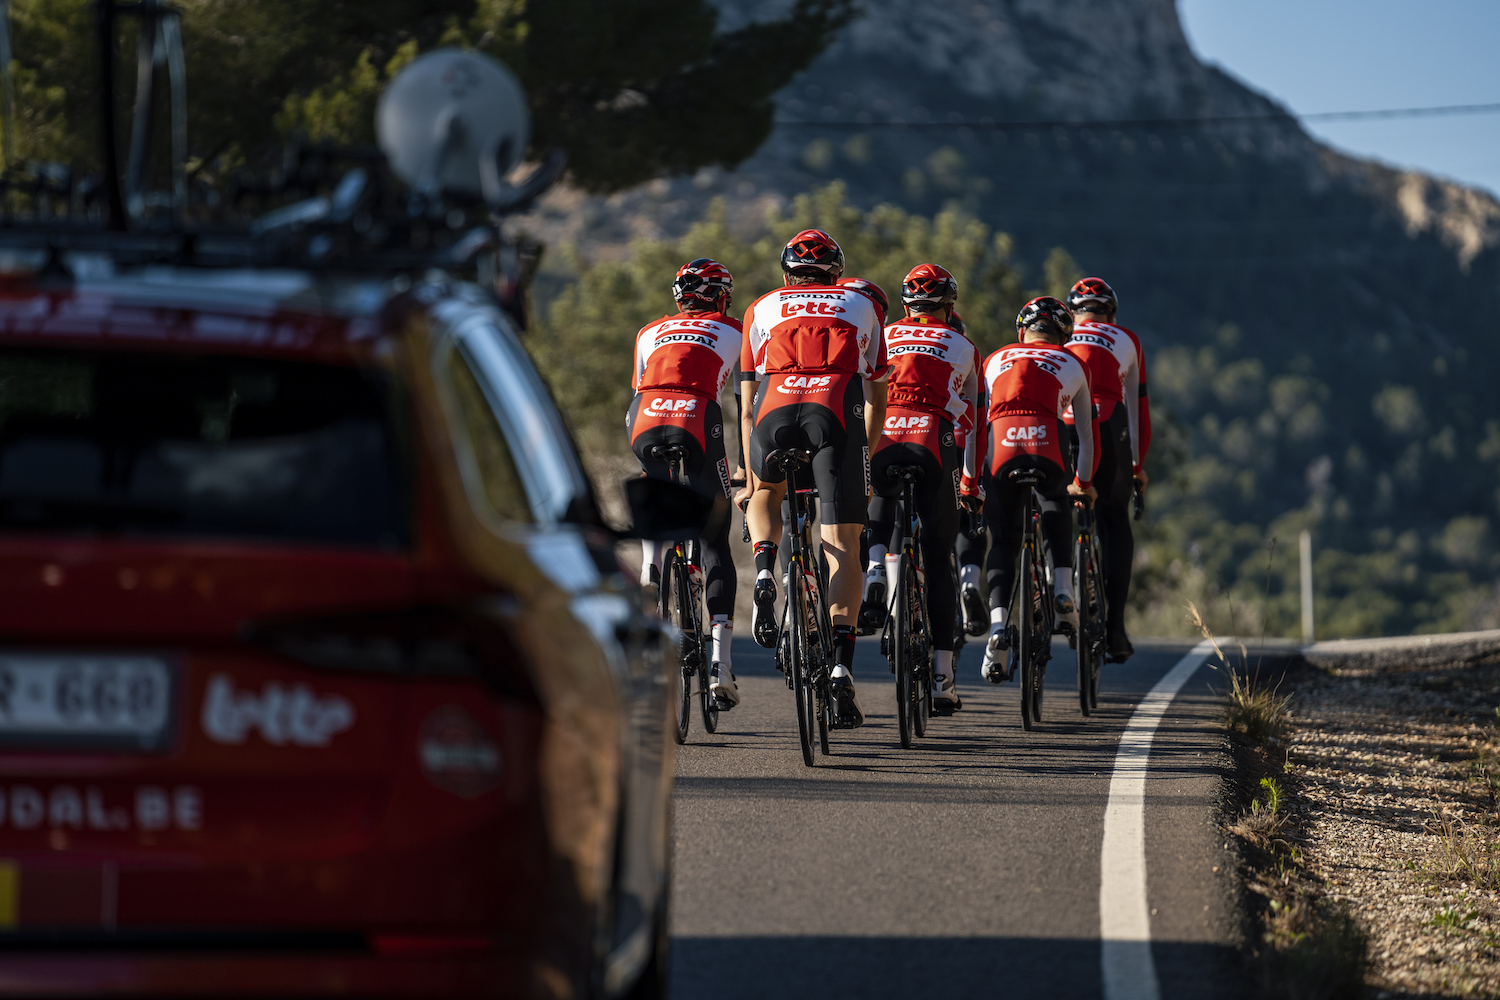 Lotto Soudal Cycling Team Partner with OTE — OTE Sports